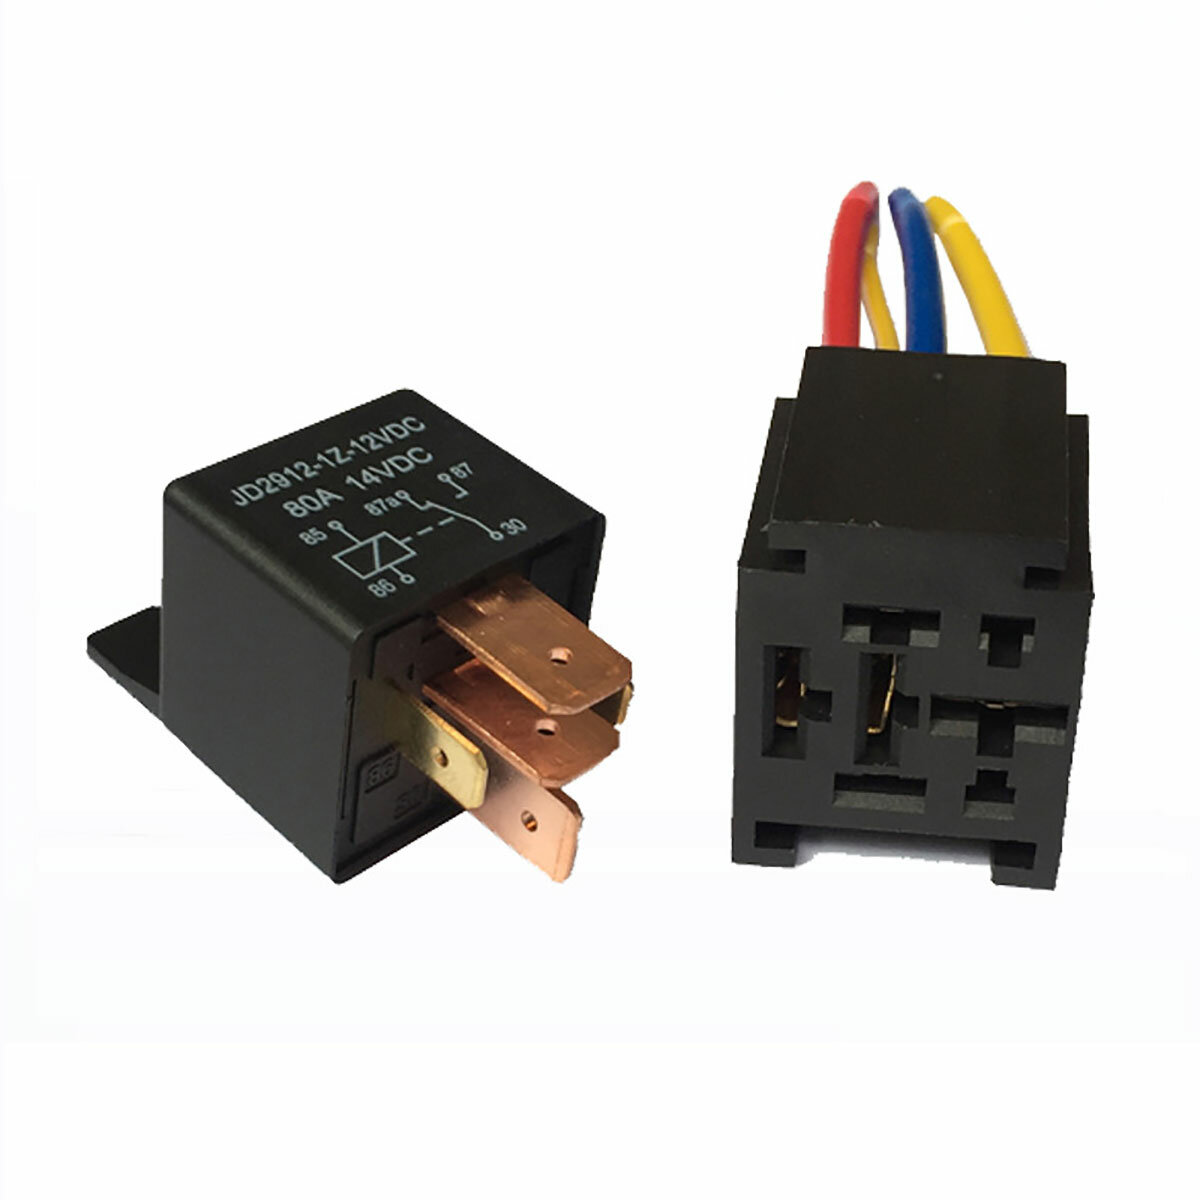 

12V 80A 5-Pin MP SPDT Relay with Harness Socket Waterproof For Car Starter SUV Automotive Universal